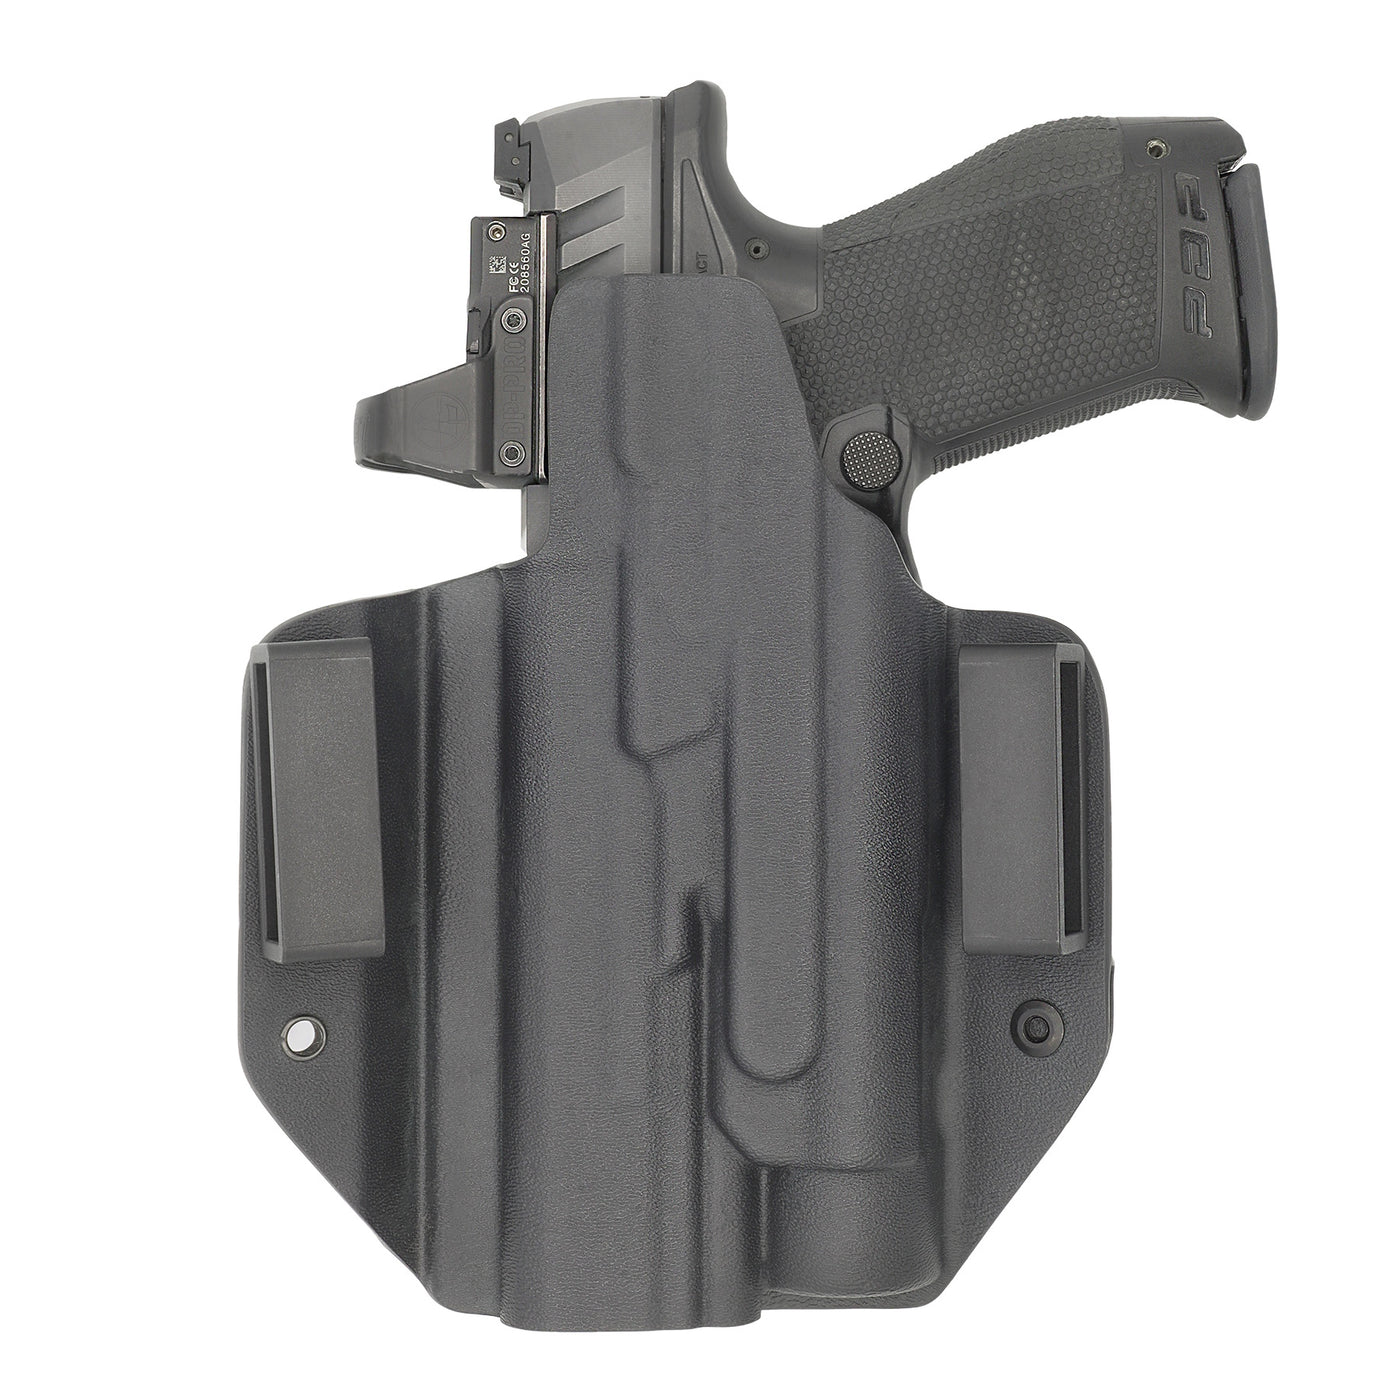 C&G Holsters custom OWB Tactical CZ P07/9 Streamlight TLR1 in holstered position back view